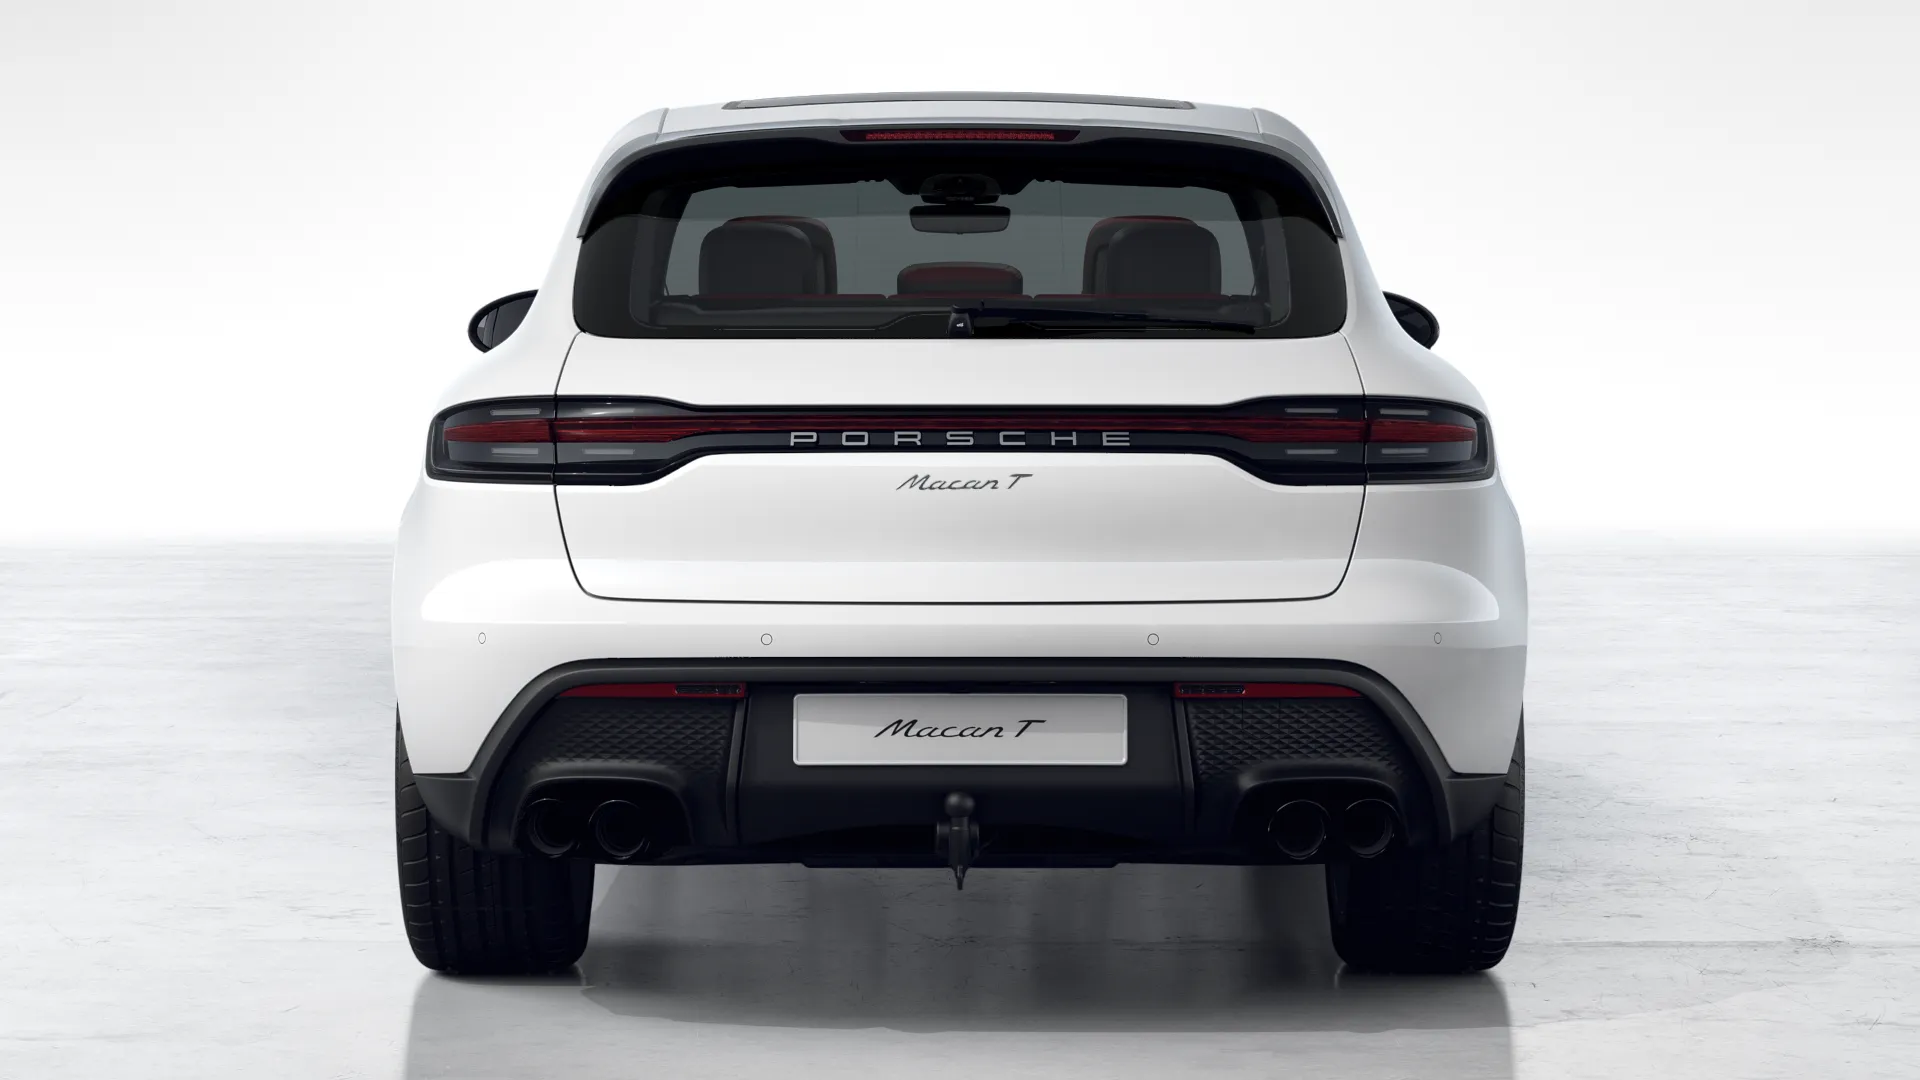 Exterior view of Macan T